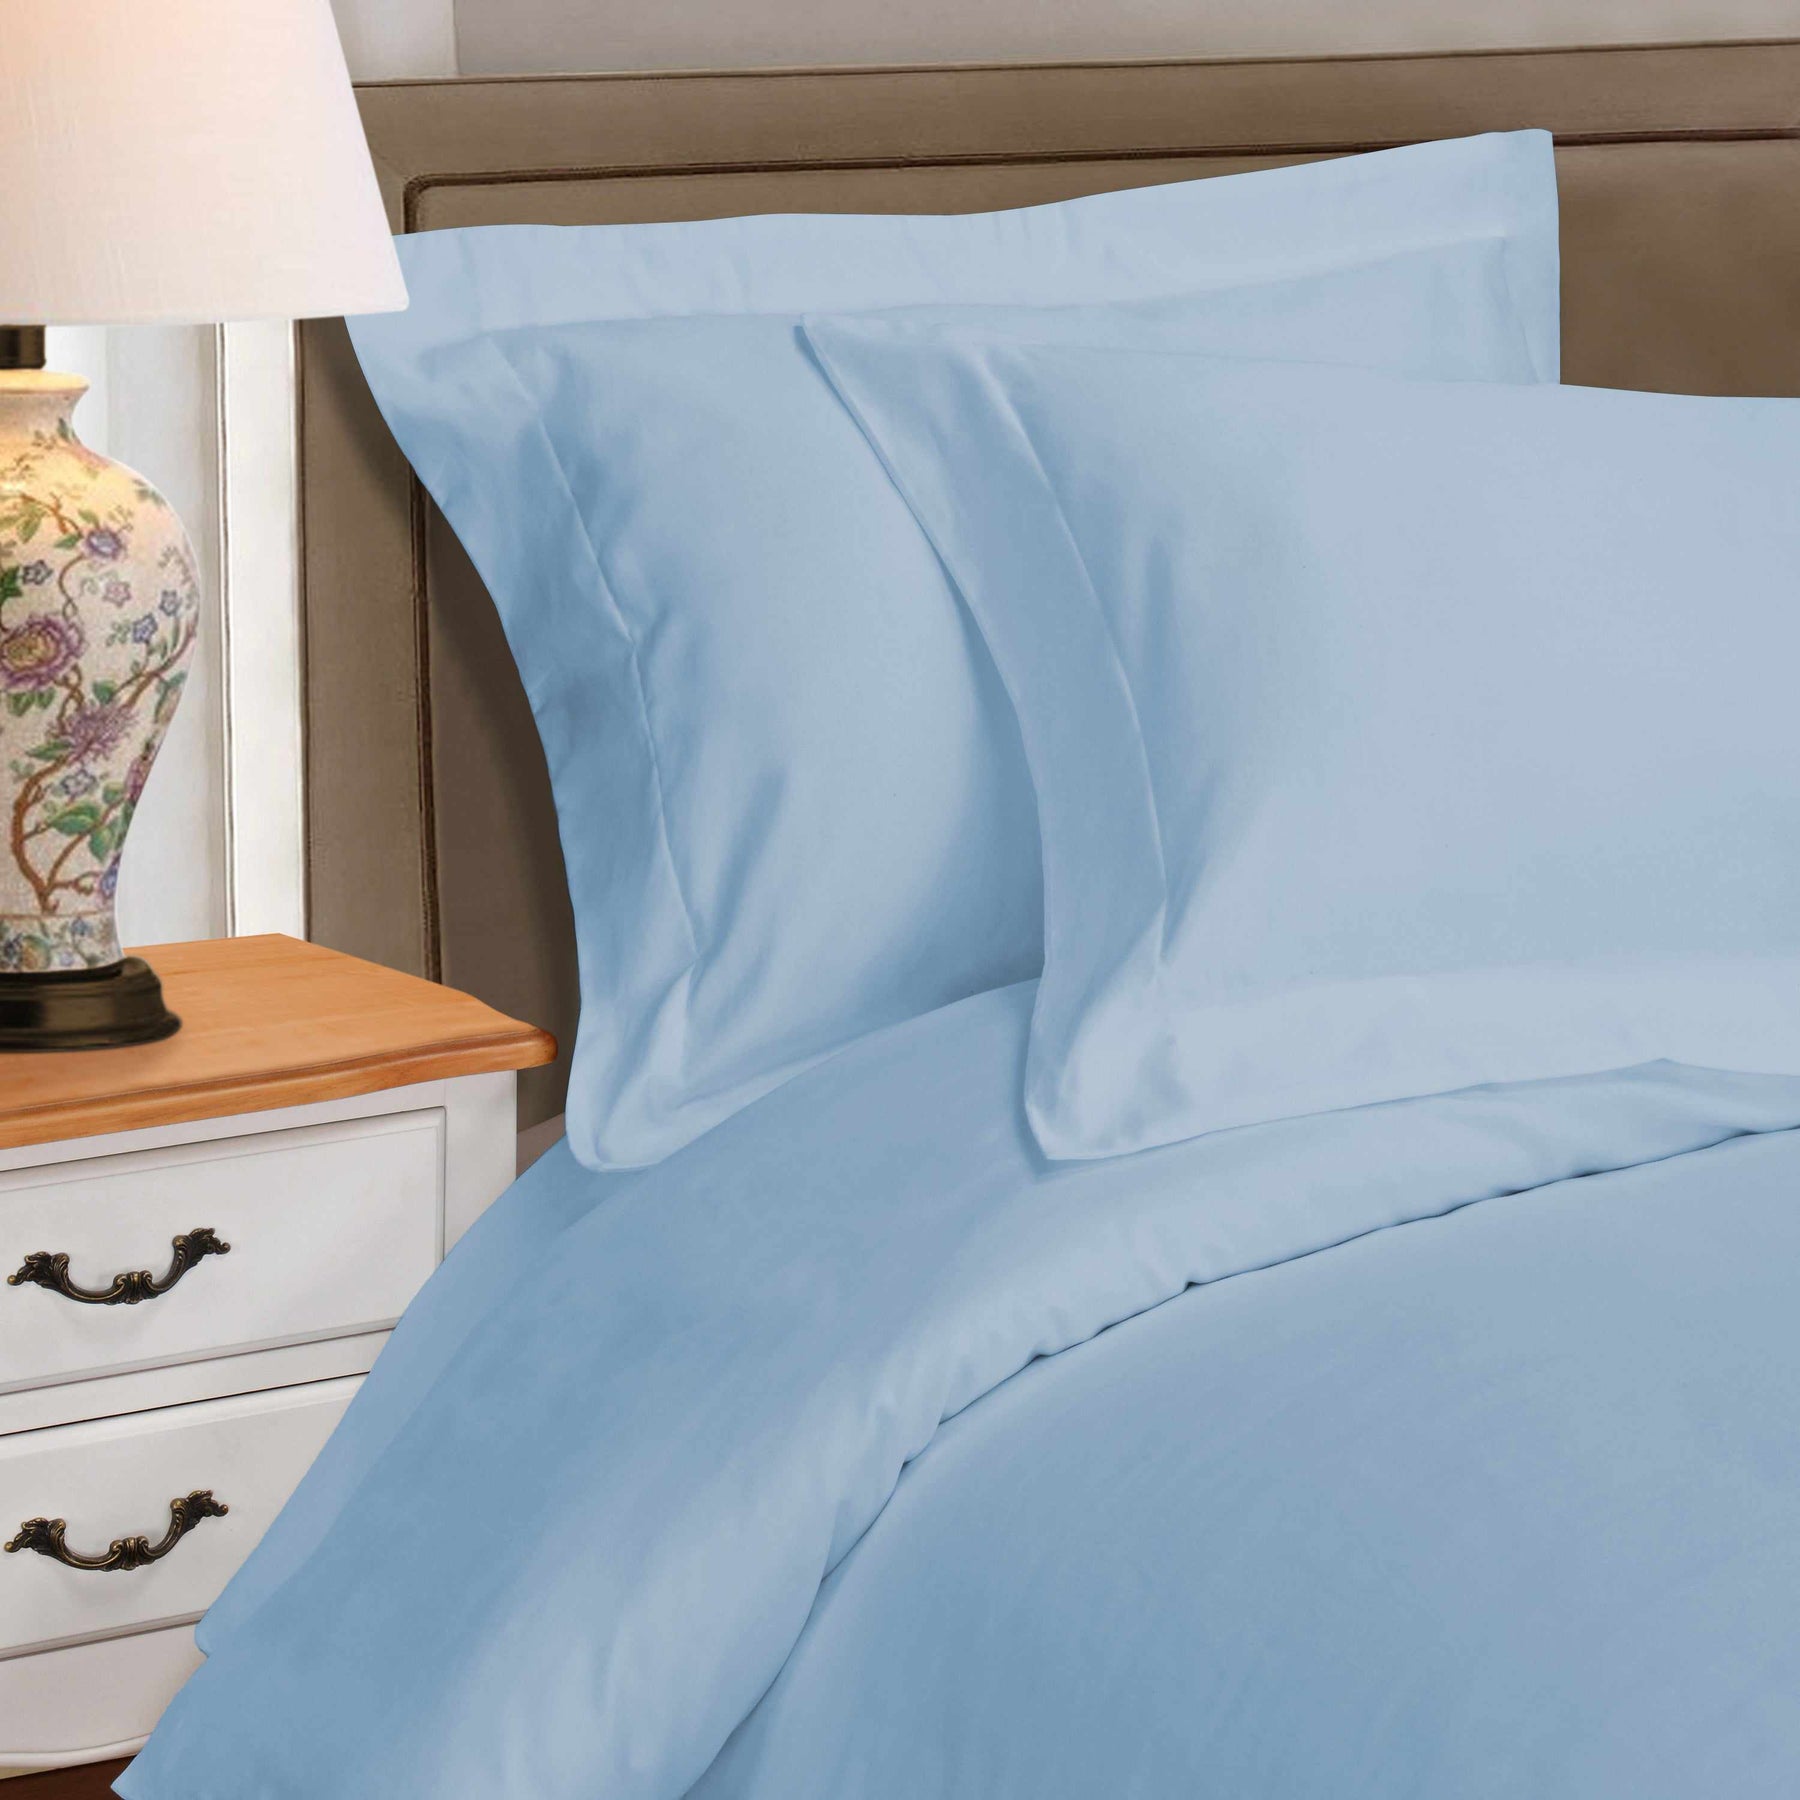  Superior Egyptian Cotton Solid All-Season Duvet Cover Set with Button Closure - Light Blue